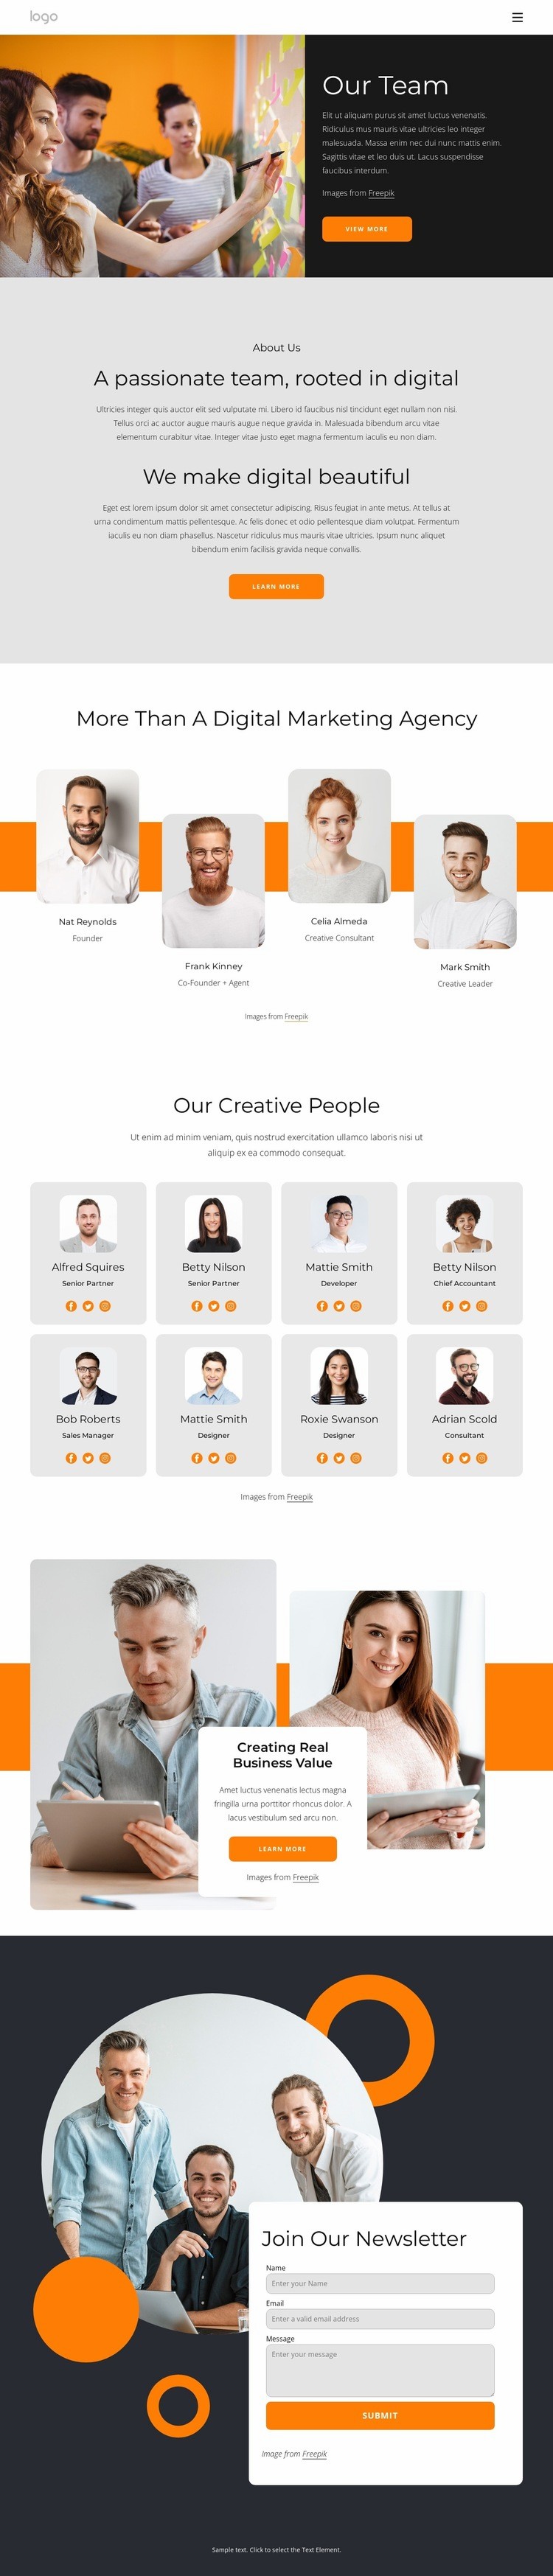 We are creative people with big dreams Elementor Template Alternative